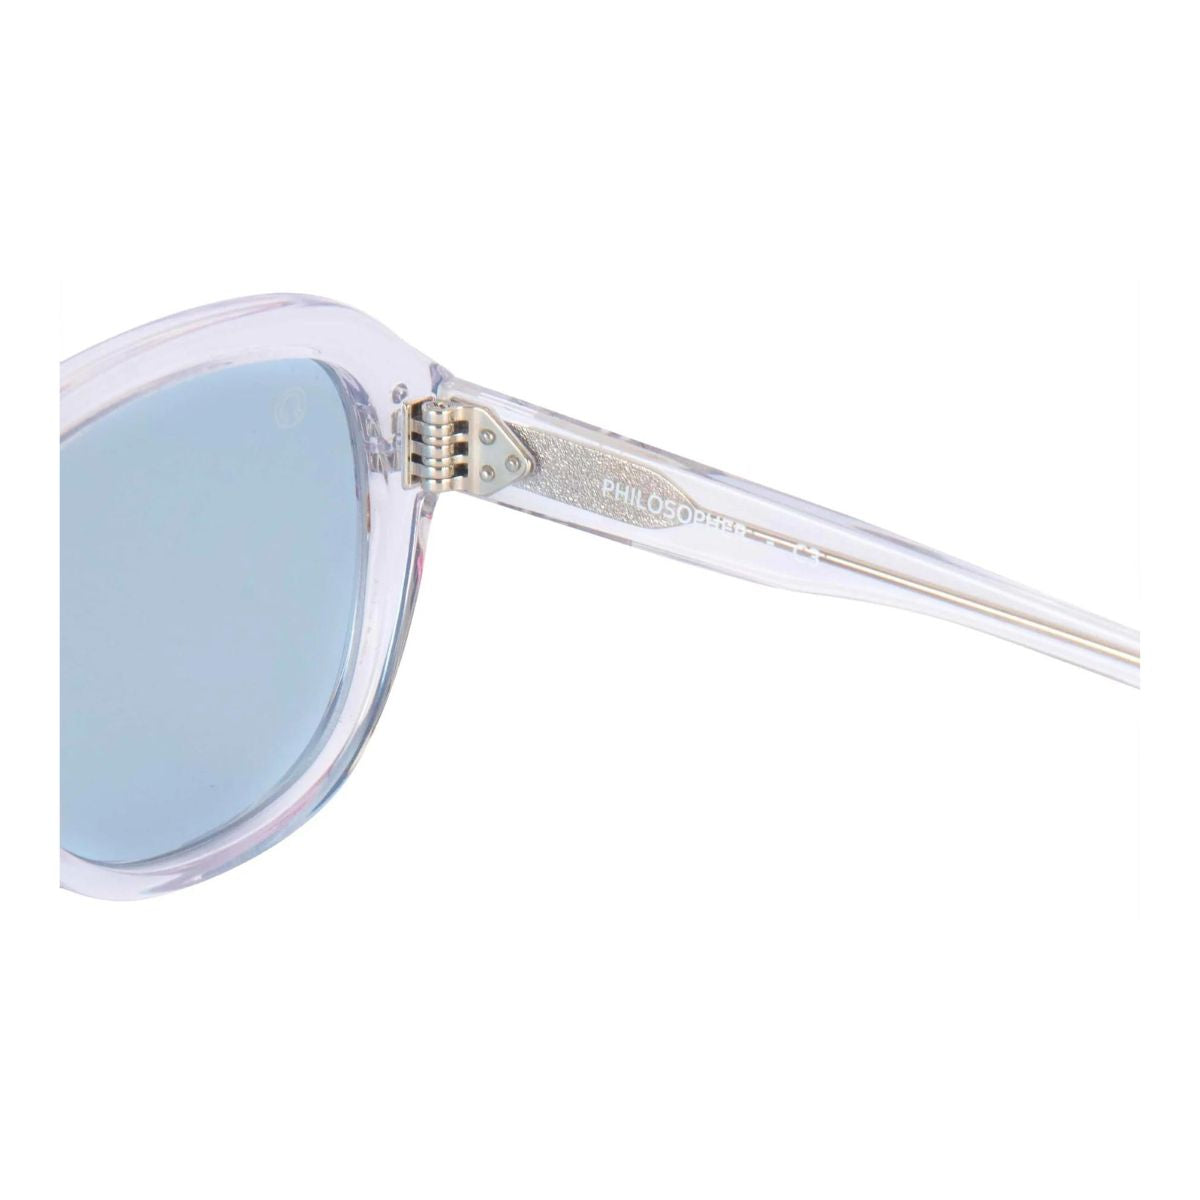 "The Monk Philosopher C3 Stylish Aviator Shades For Men And Women At Optorium"